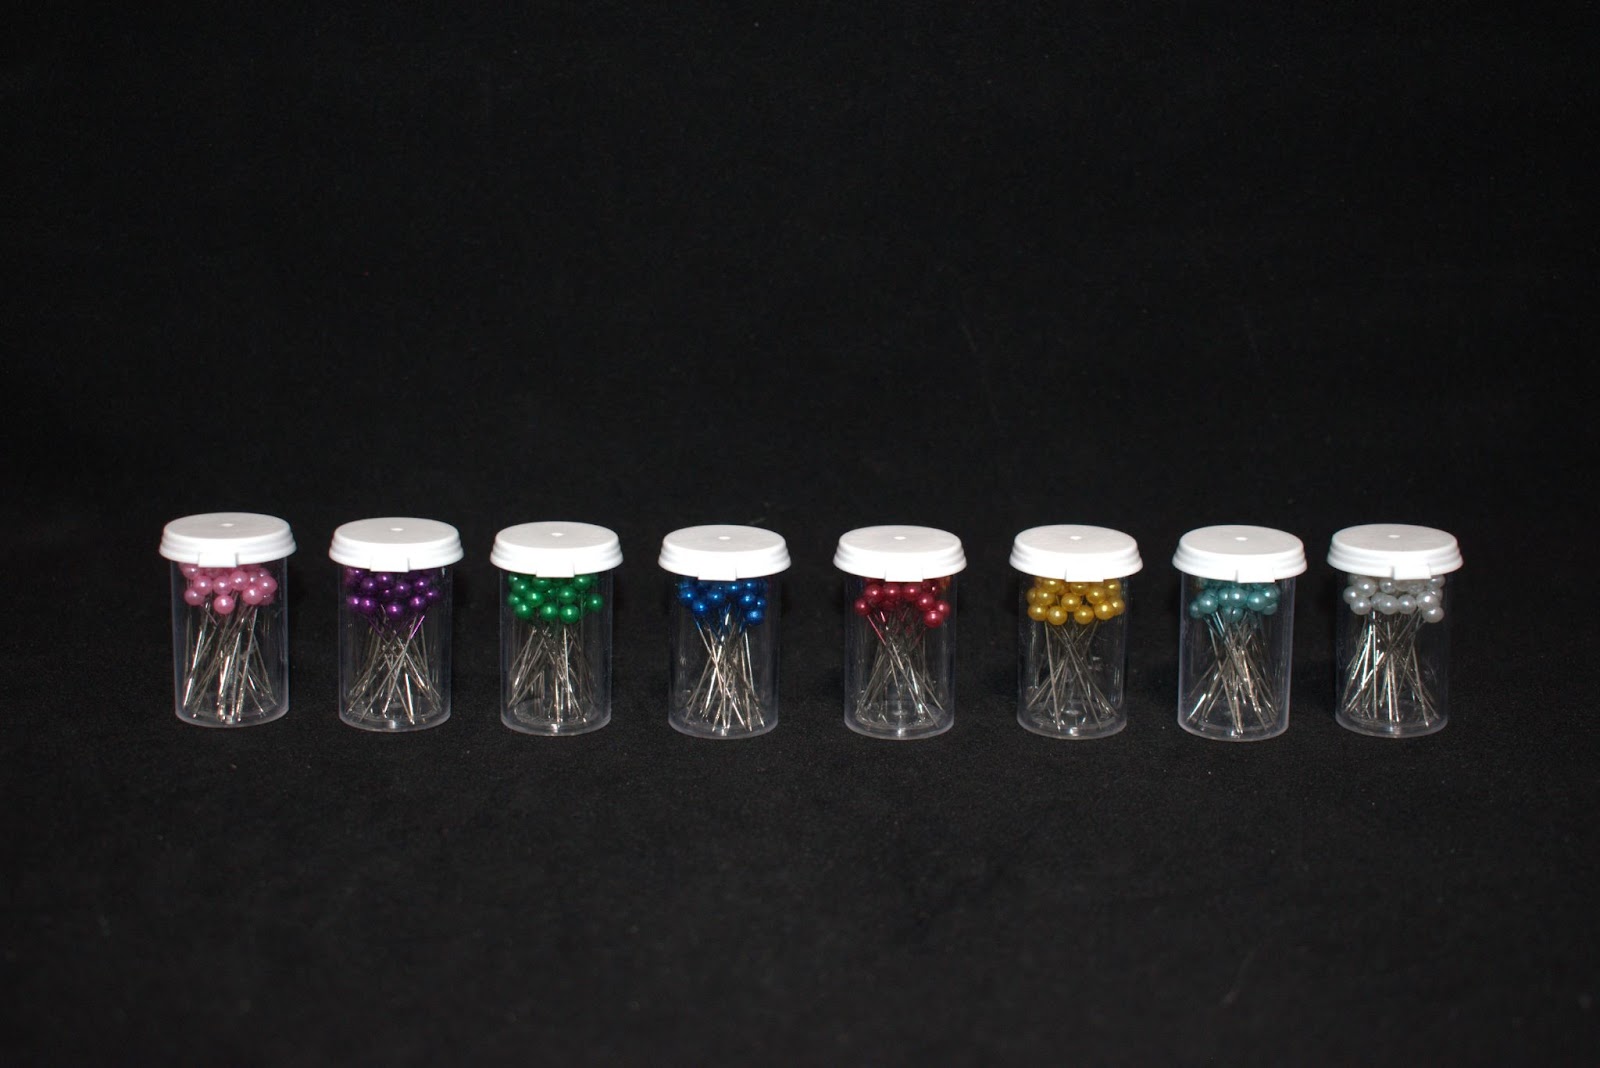 Assorted Sewing Pins in 3.5 Dram Vials